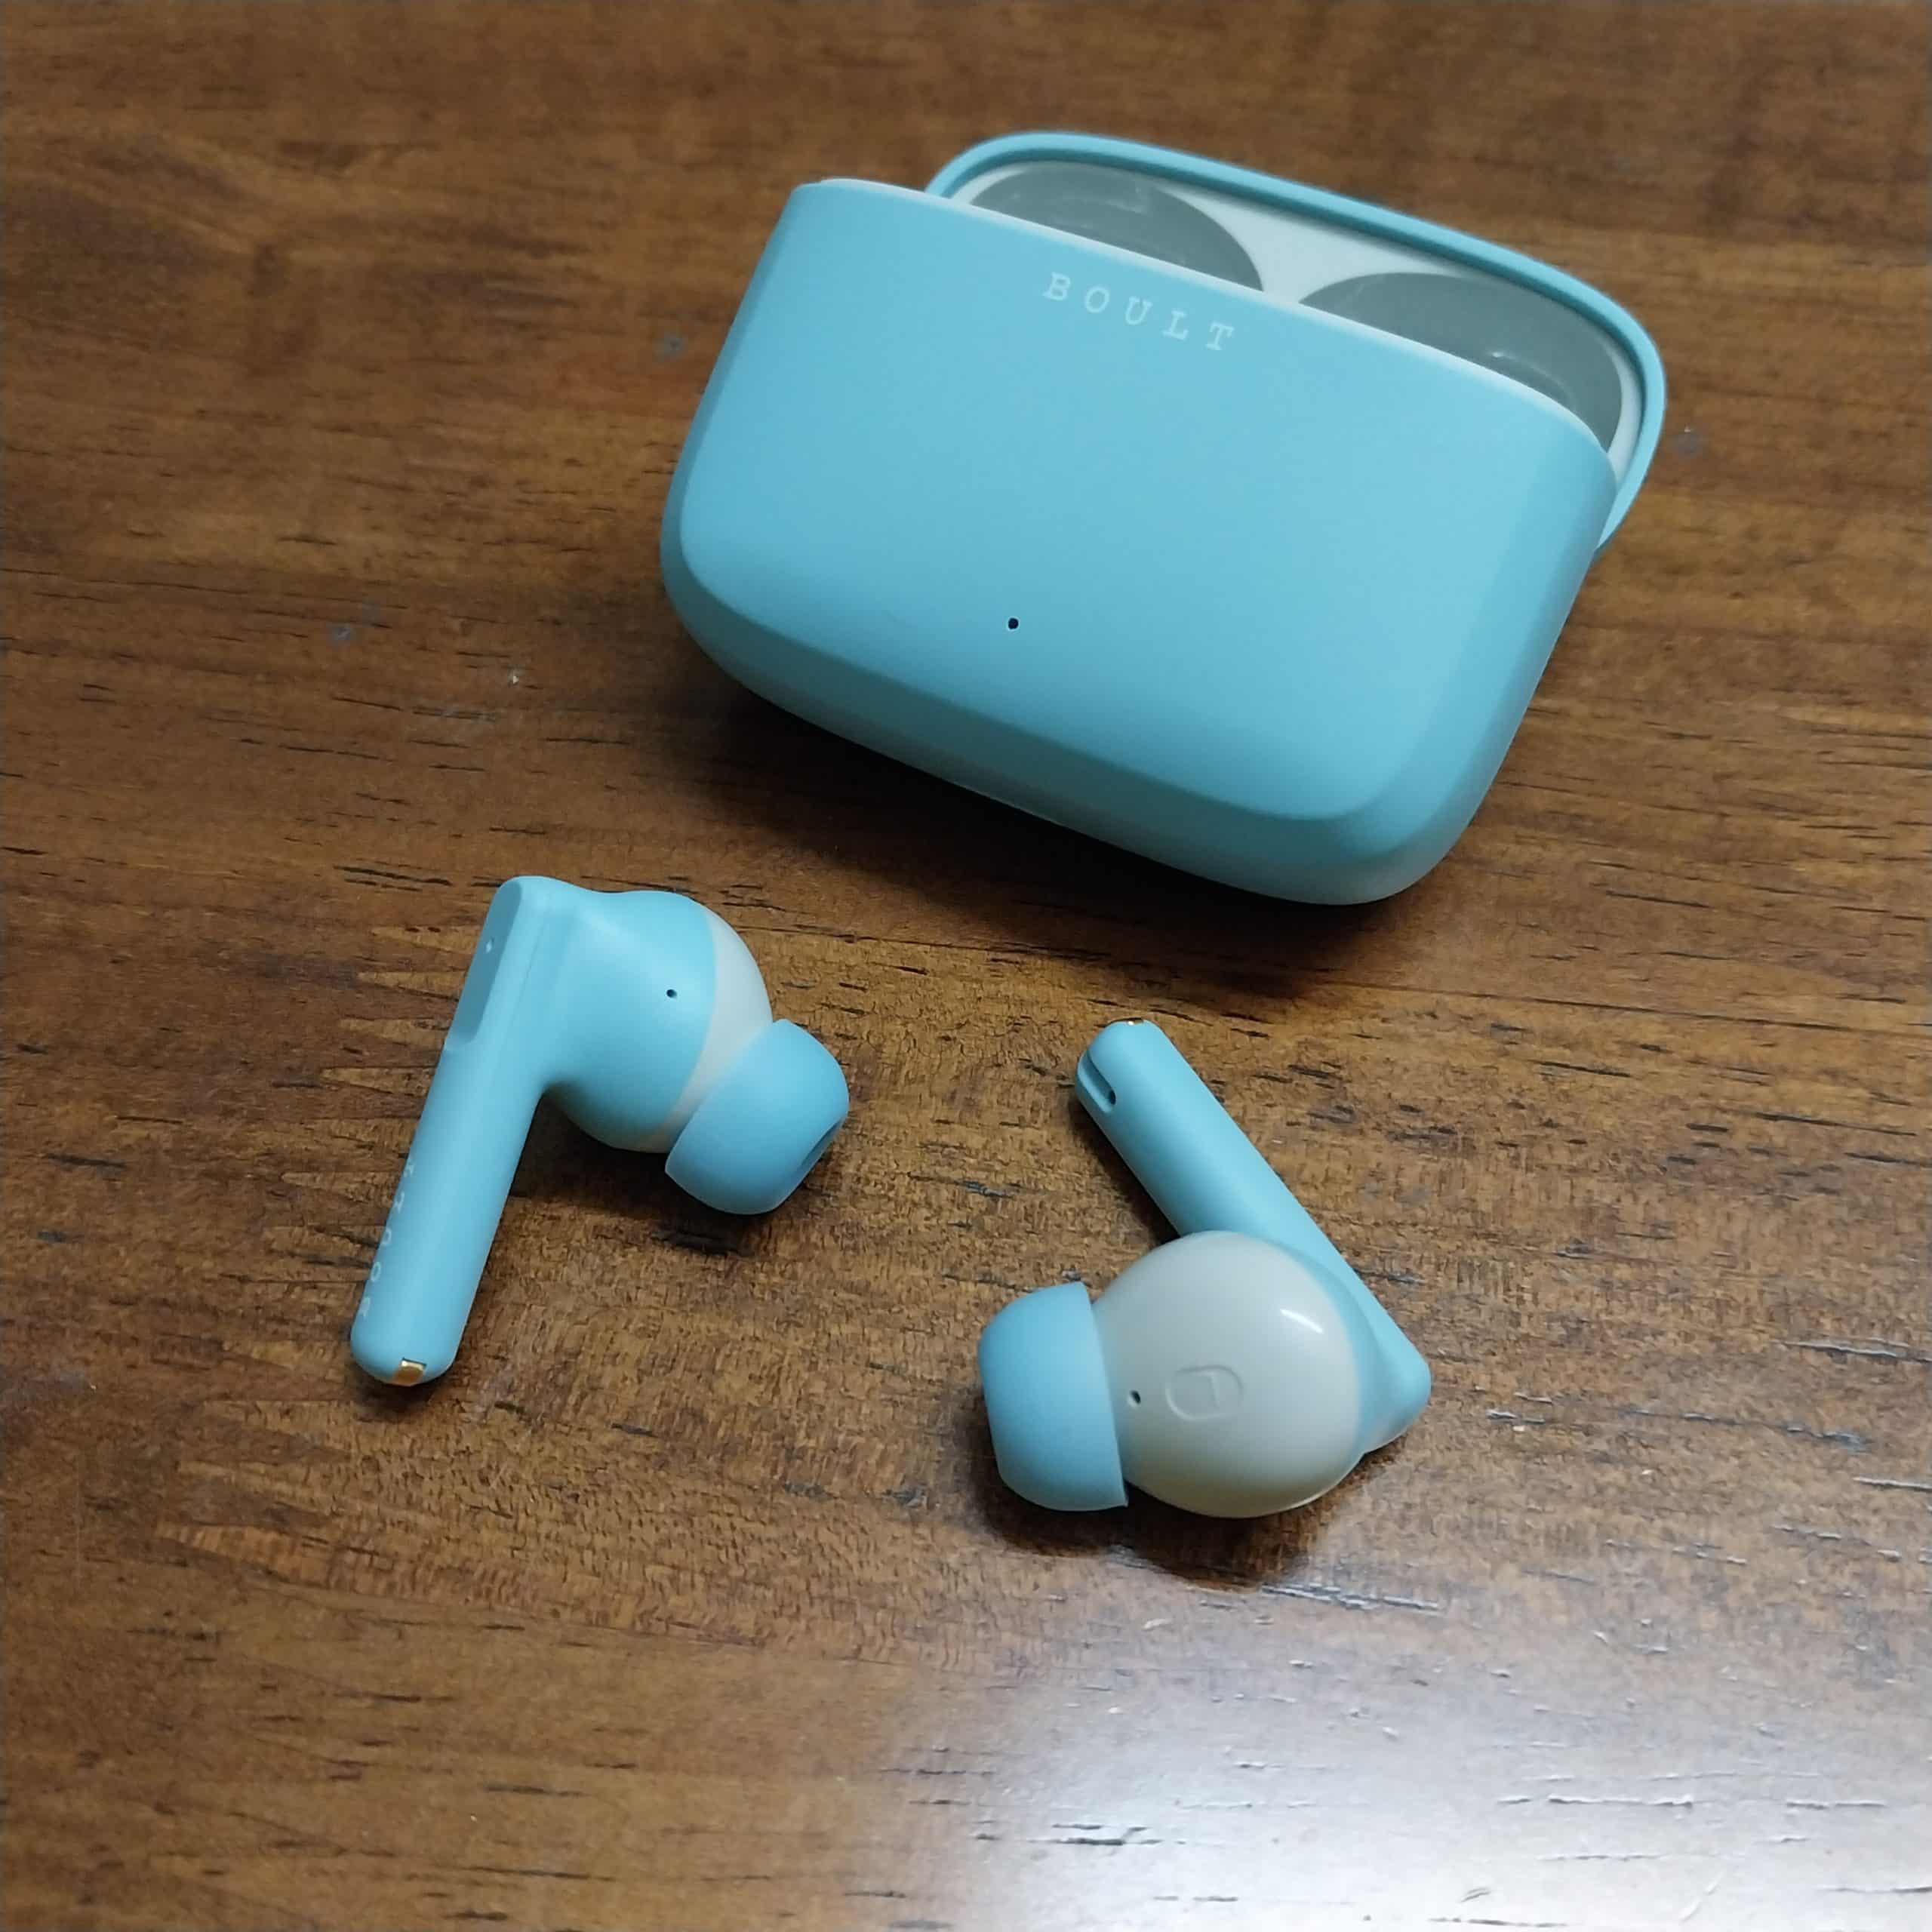 Boult Z60 Earbuds - Features